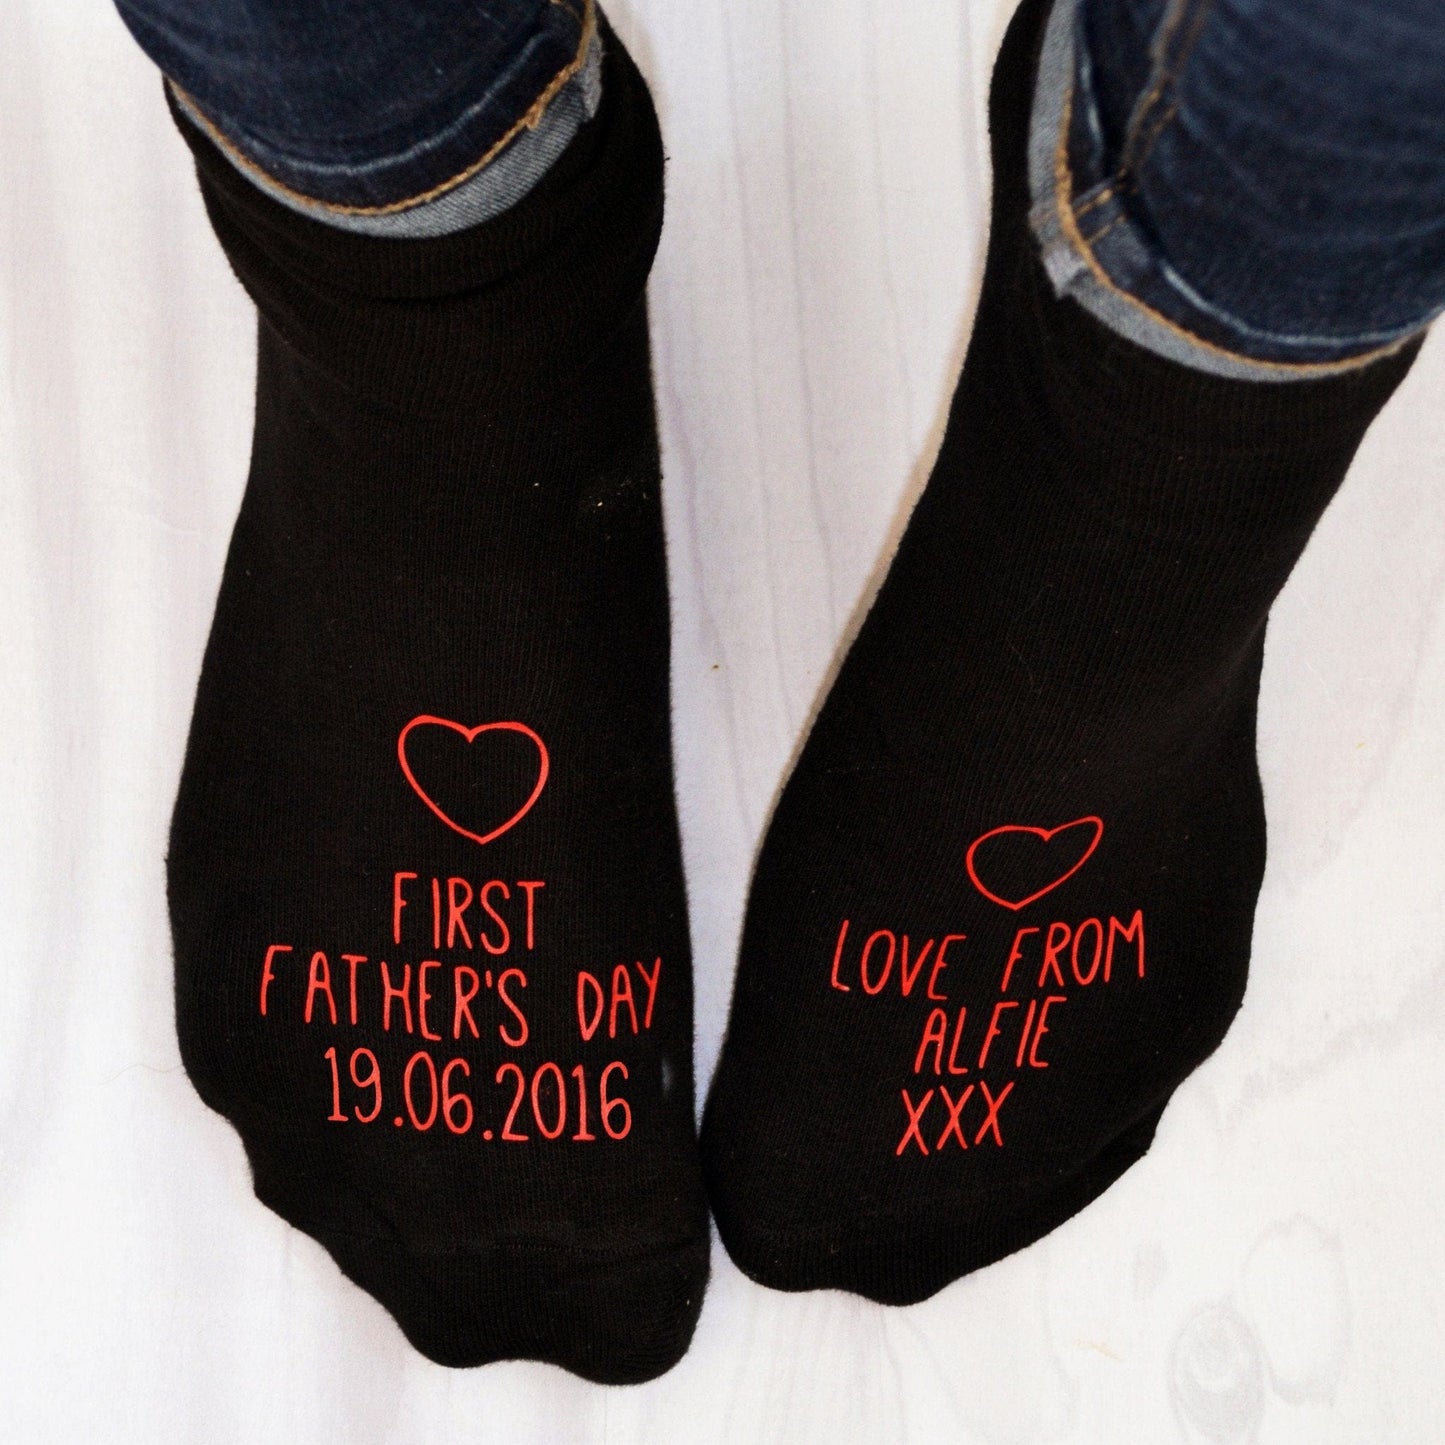 First Father's Day Personalised Socks, Socks, - ALPHS 